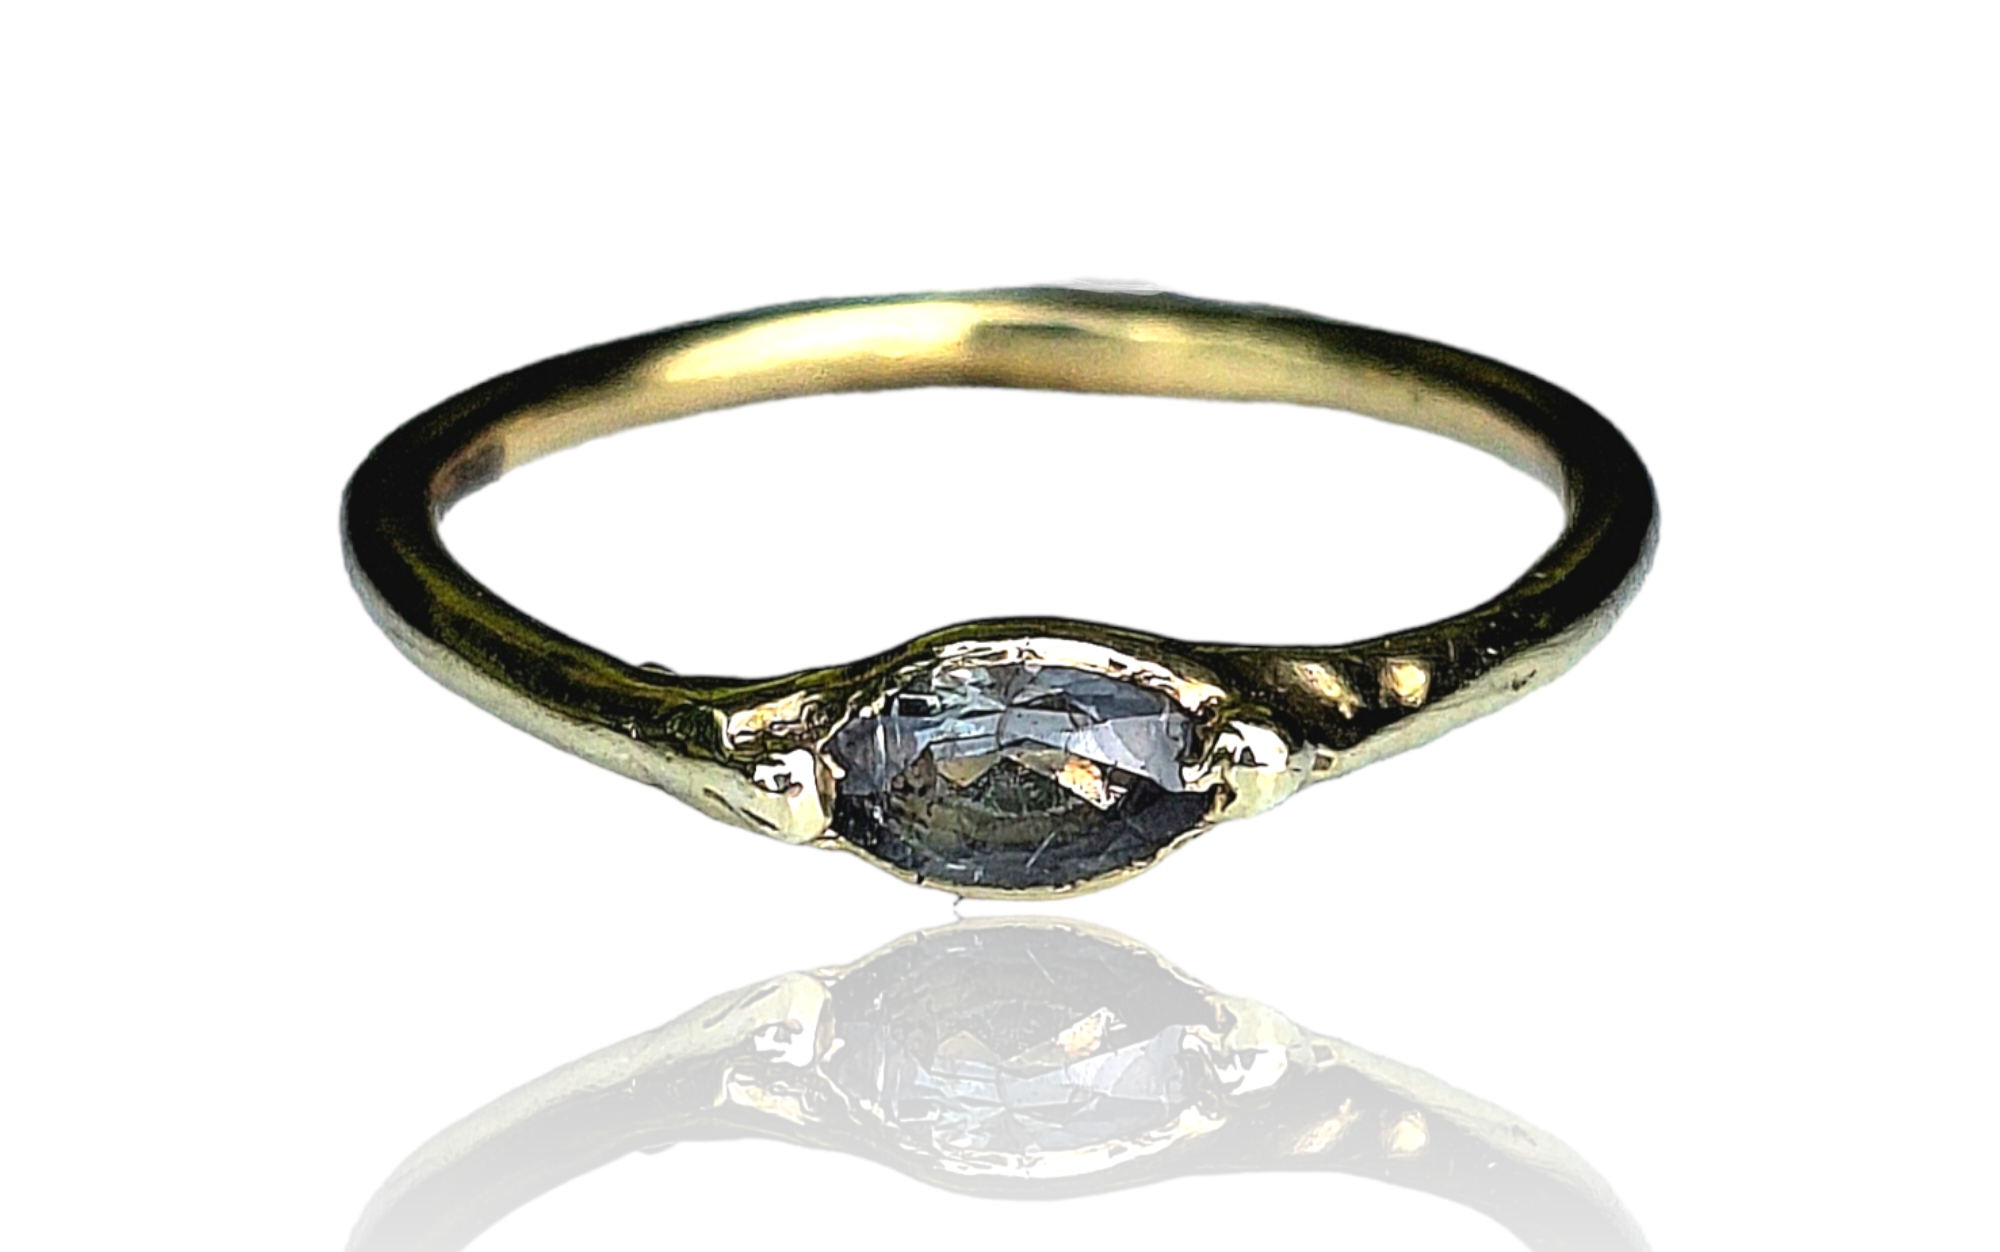 Chandra's Eye - 9k gold and blue sapphire ring